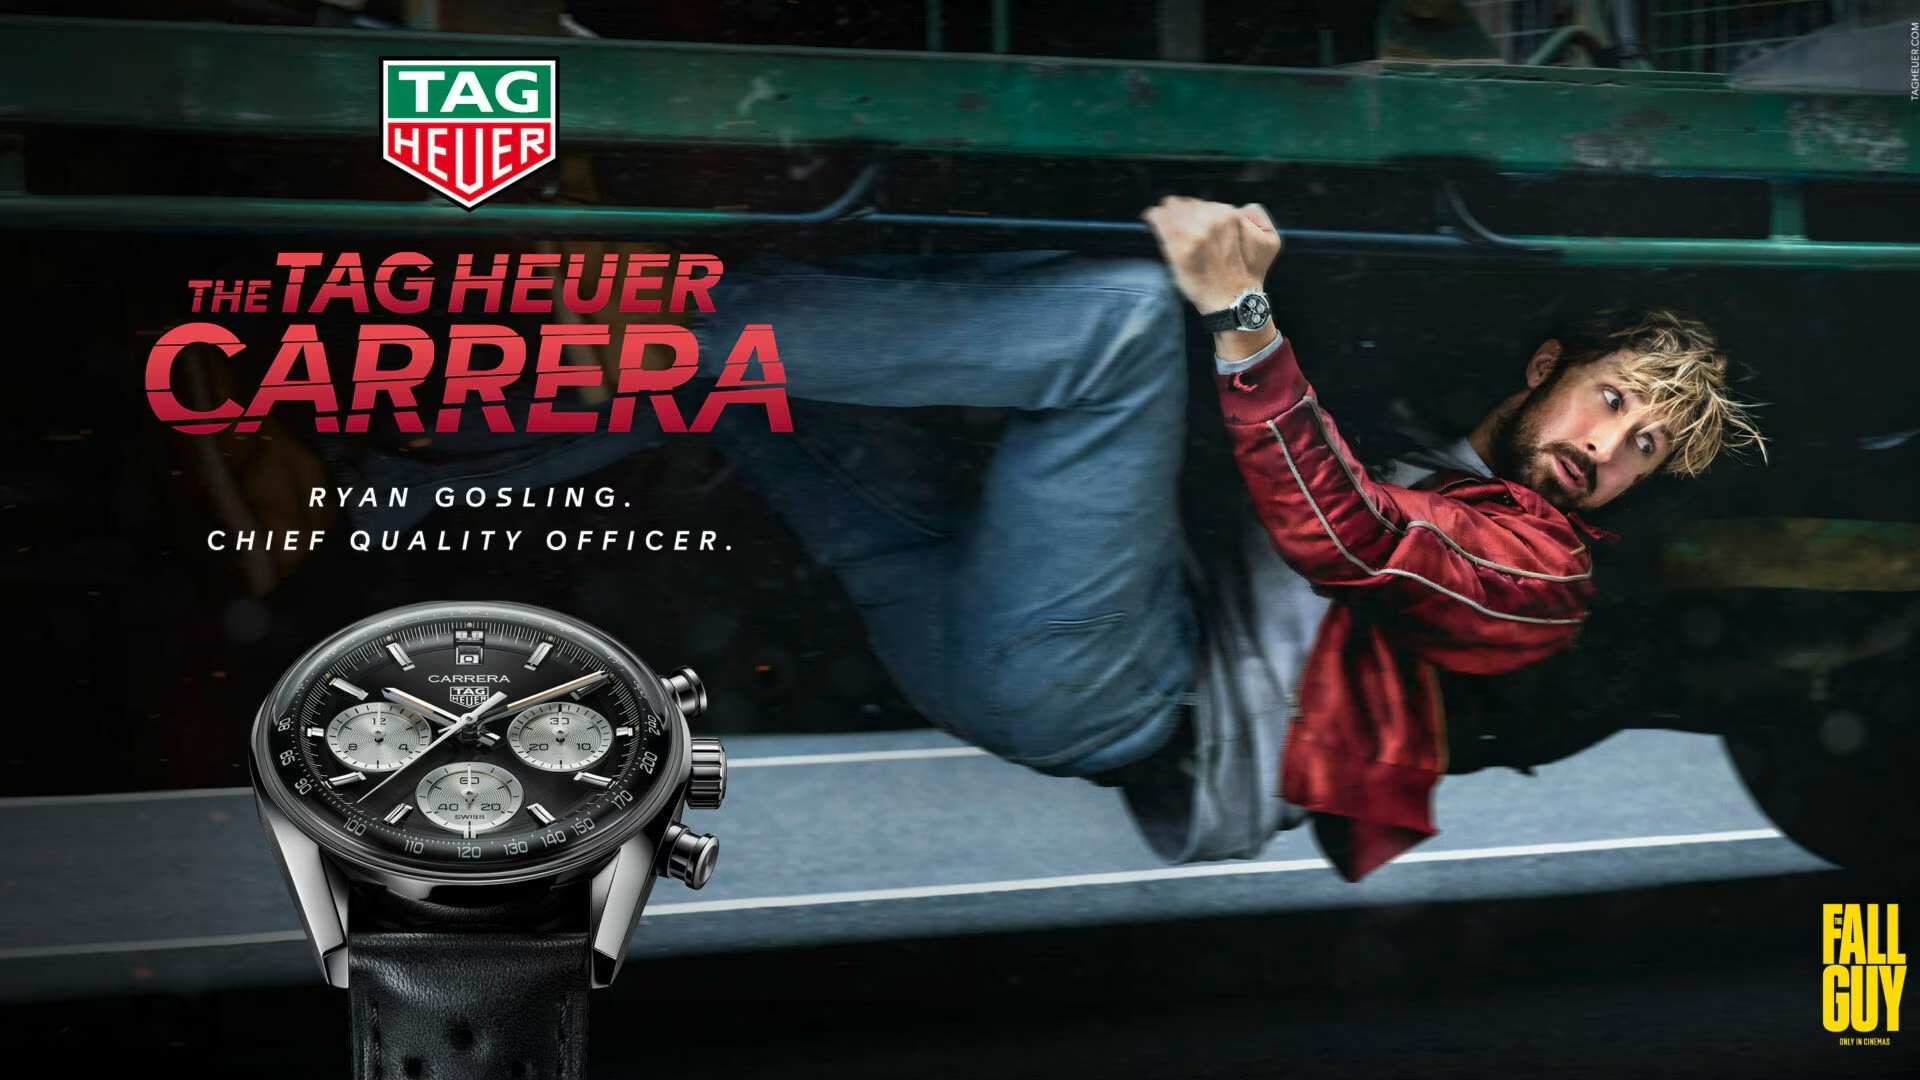 the fall guy tag heuer